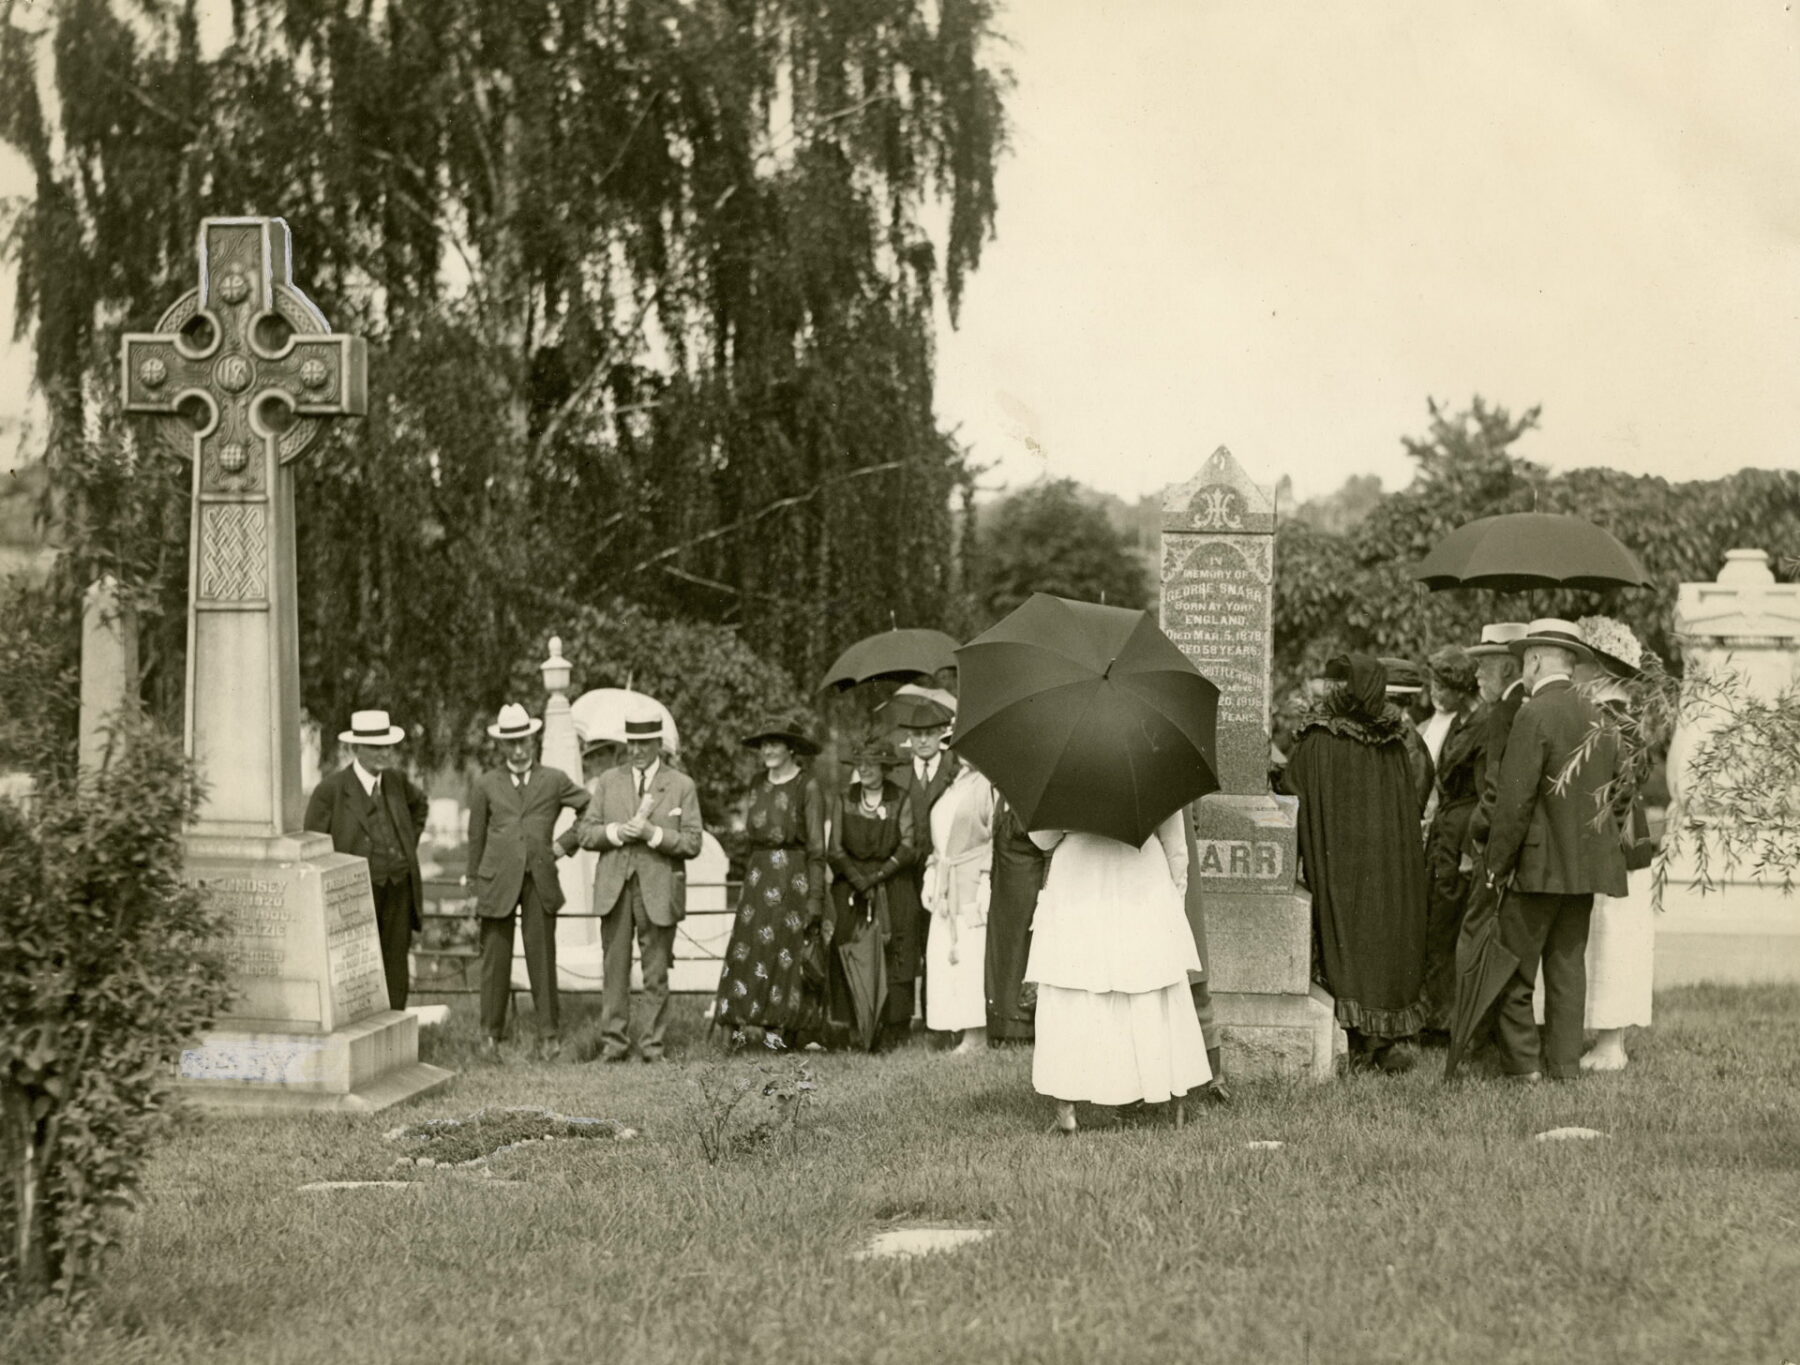 Black and white image of men and women surrounding a grave approximately 12 feet tall topped with a Celtic cross. The people are wearing black and white clothing and some are carrying black umbrellas. Other graves are visible around them.